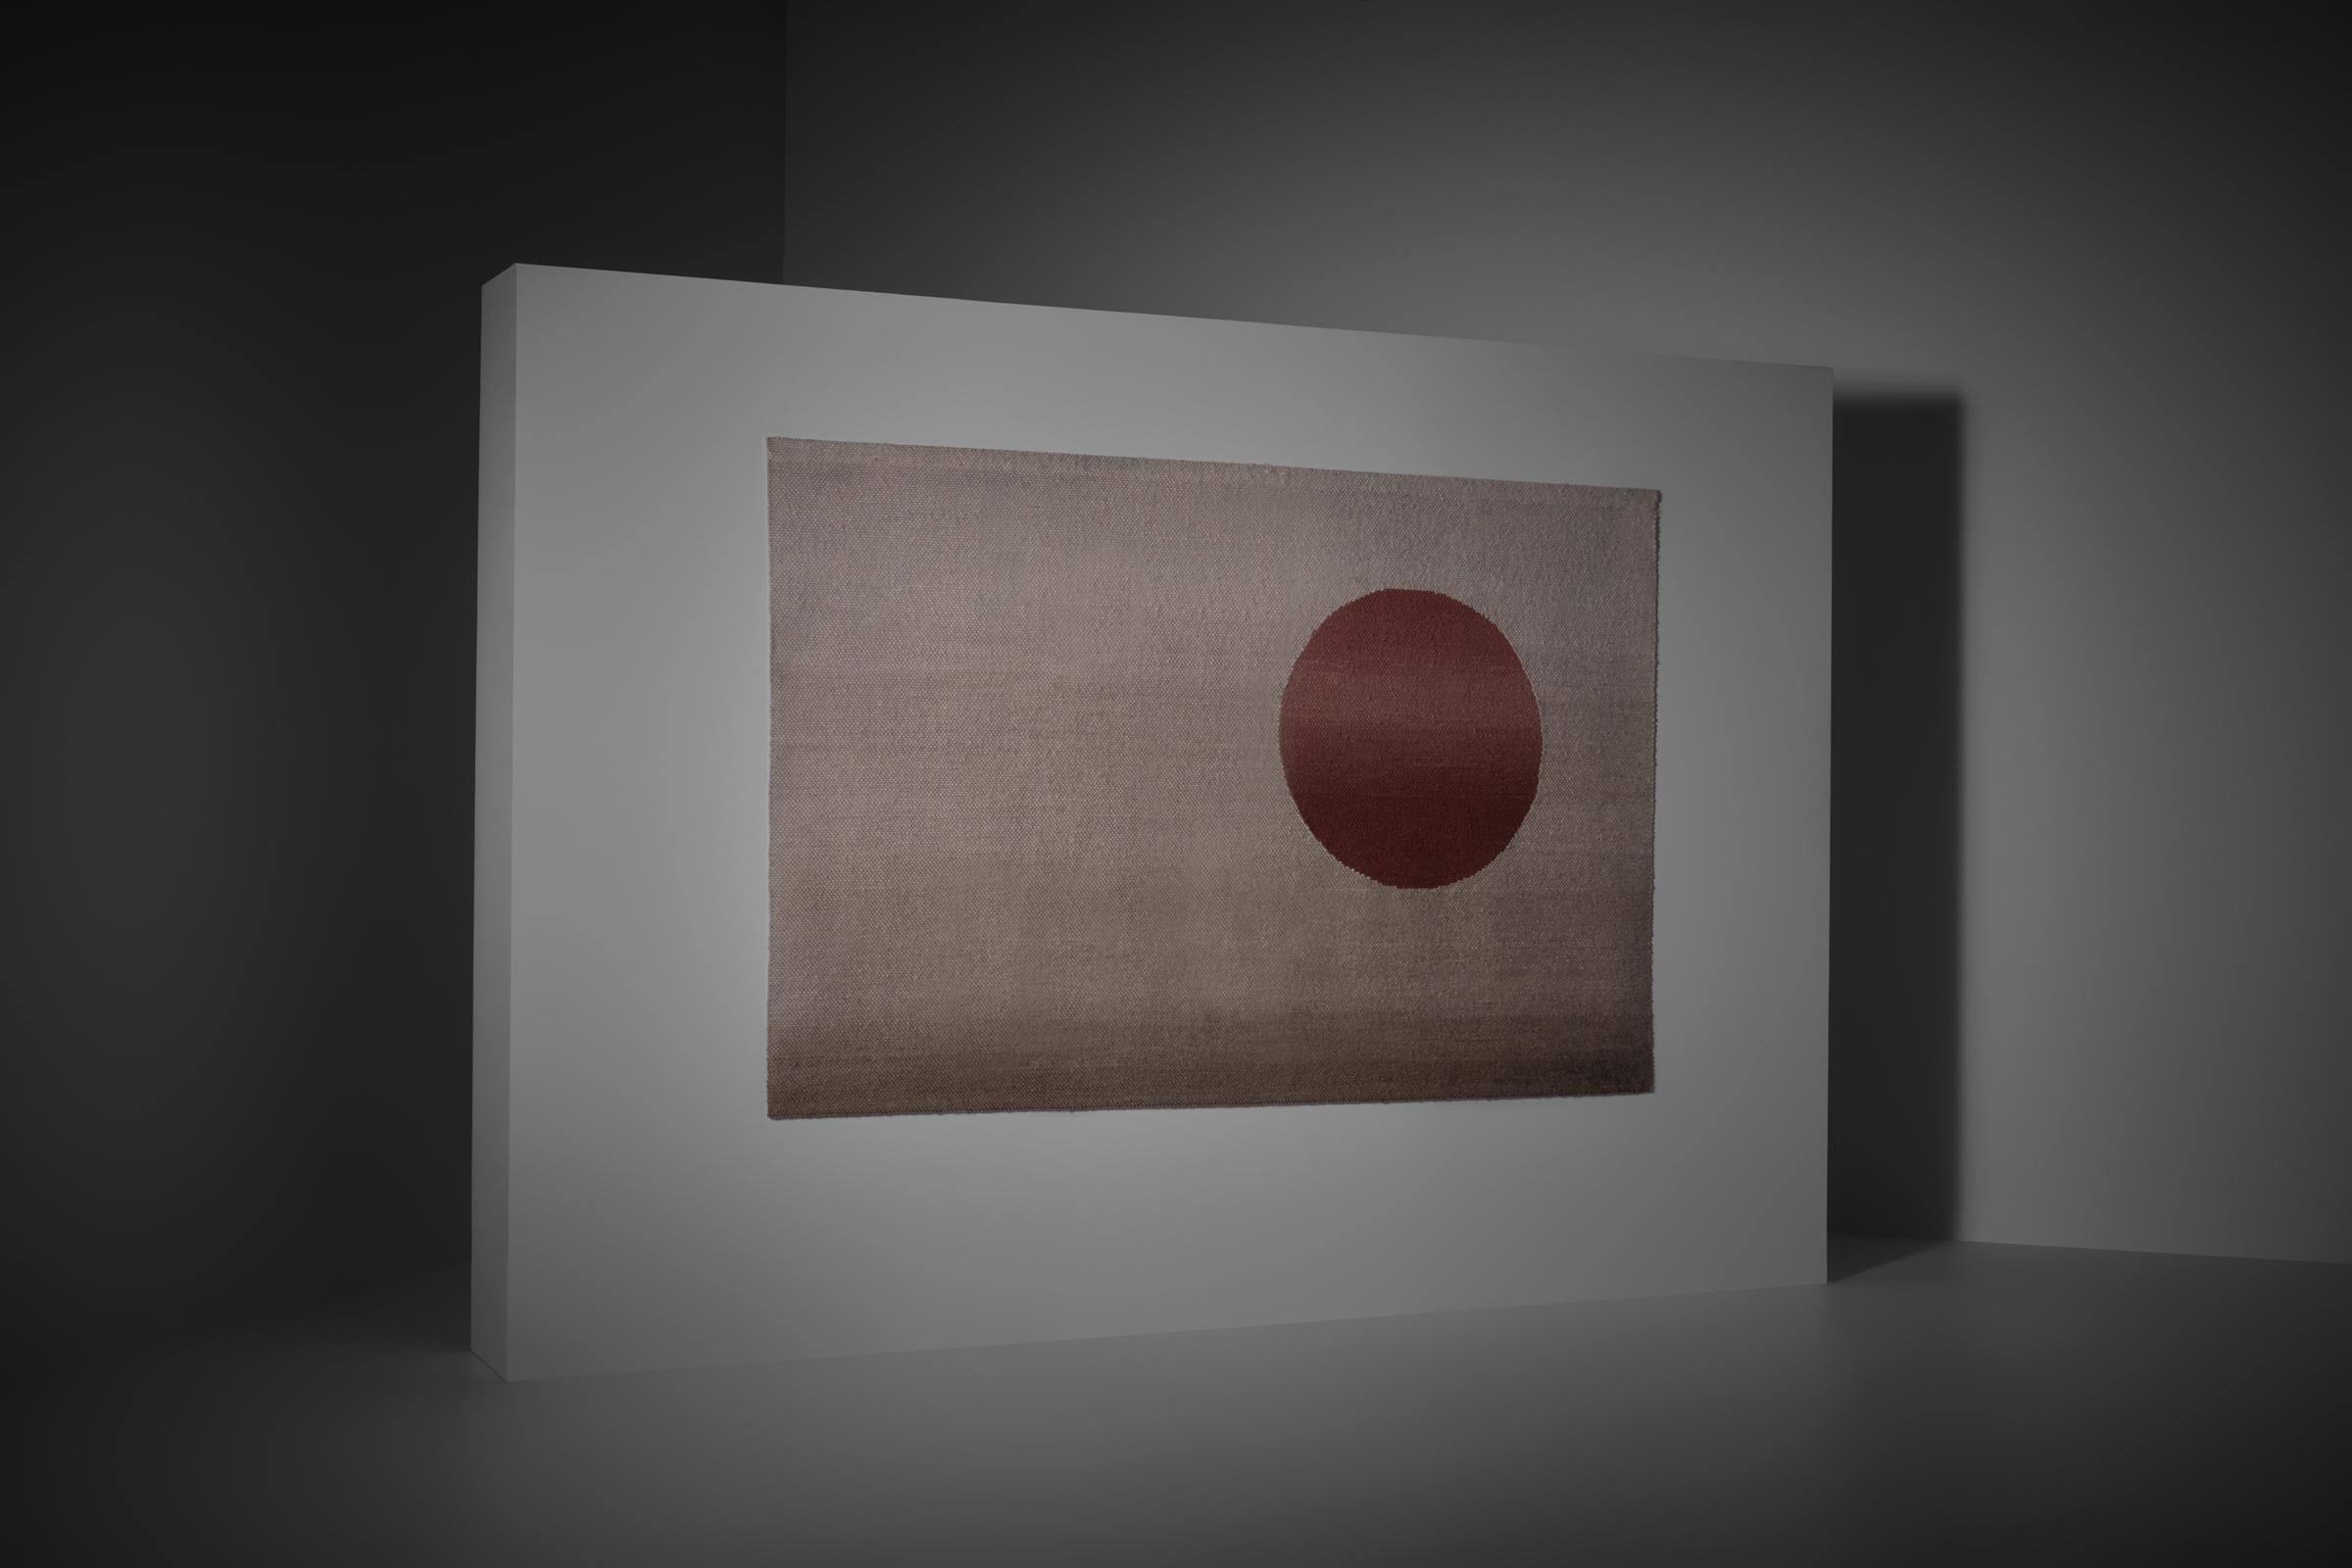 Unique abstract woolen wall tapestry by Alice Sion, France 1960s. The work is called 'Solstice d'hiver' which can be translated into ‘Winter sun'. The presentation is performed in a refined premium wool, all hand woven in a beautiful rhythmic